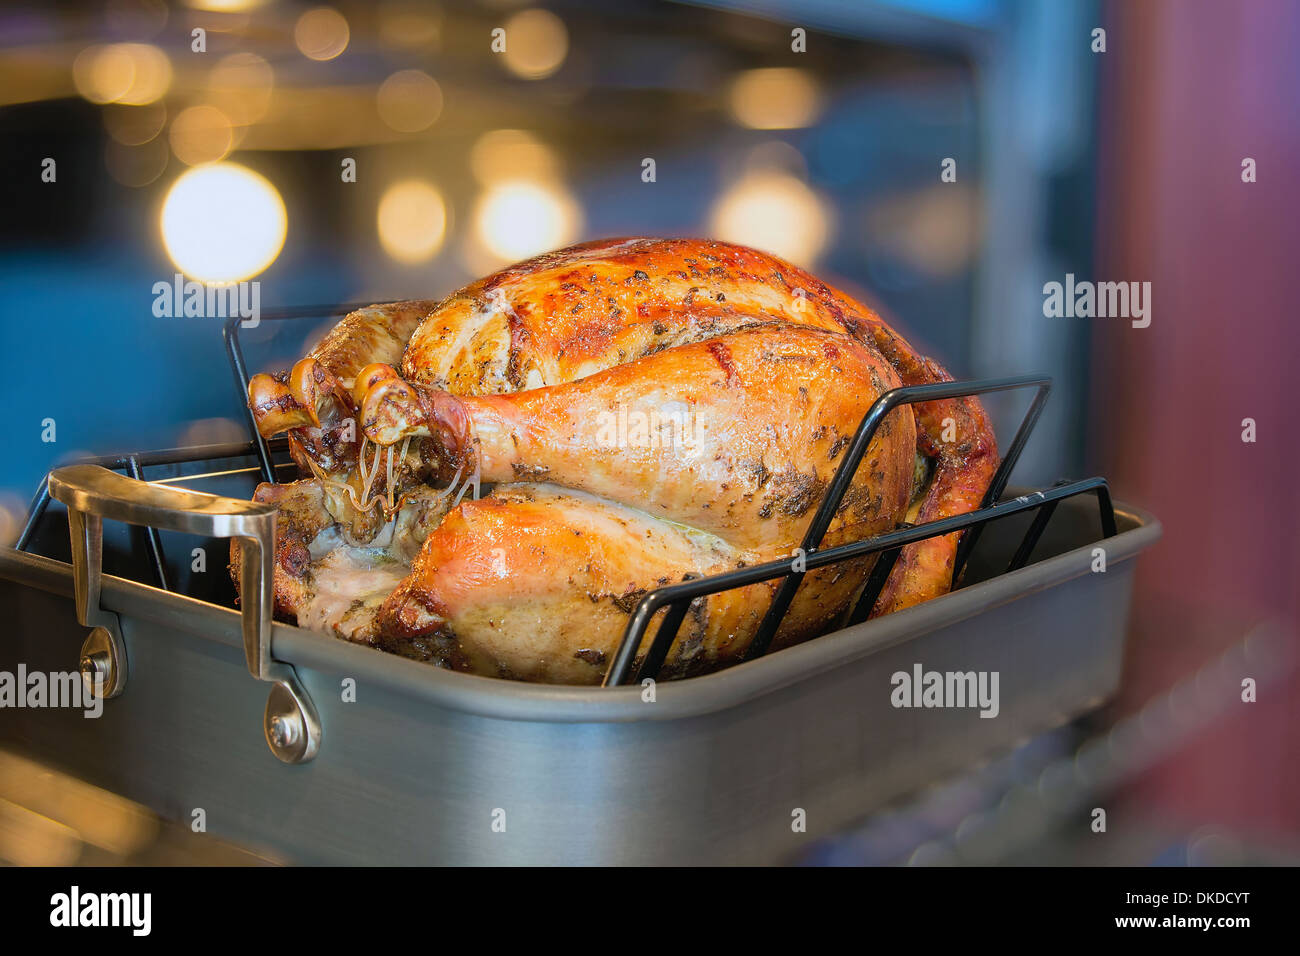 Turkey Cooked Brined and Seasoned with Spices in Roasting Pan for Thanksgiving Dinner with Blurred Oven Background Stock Photo